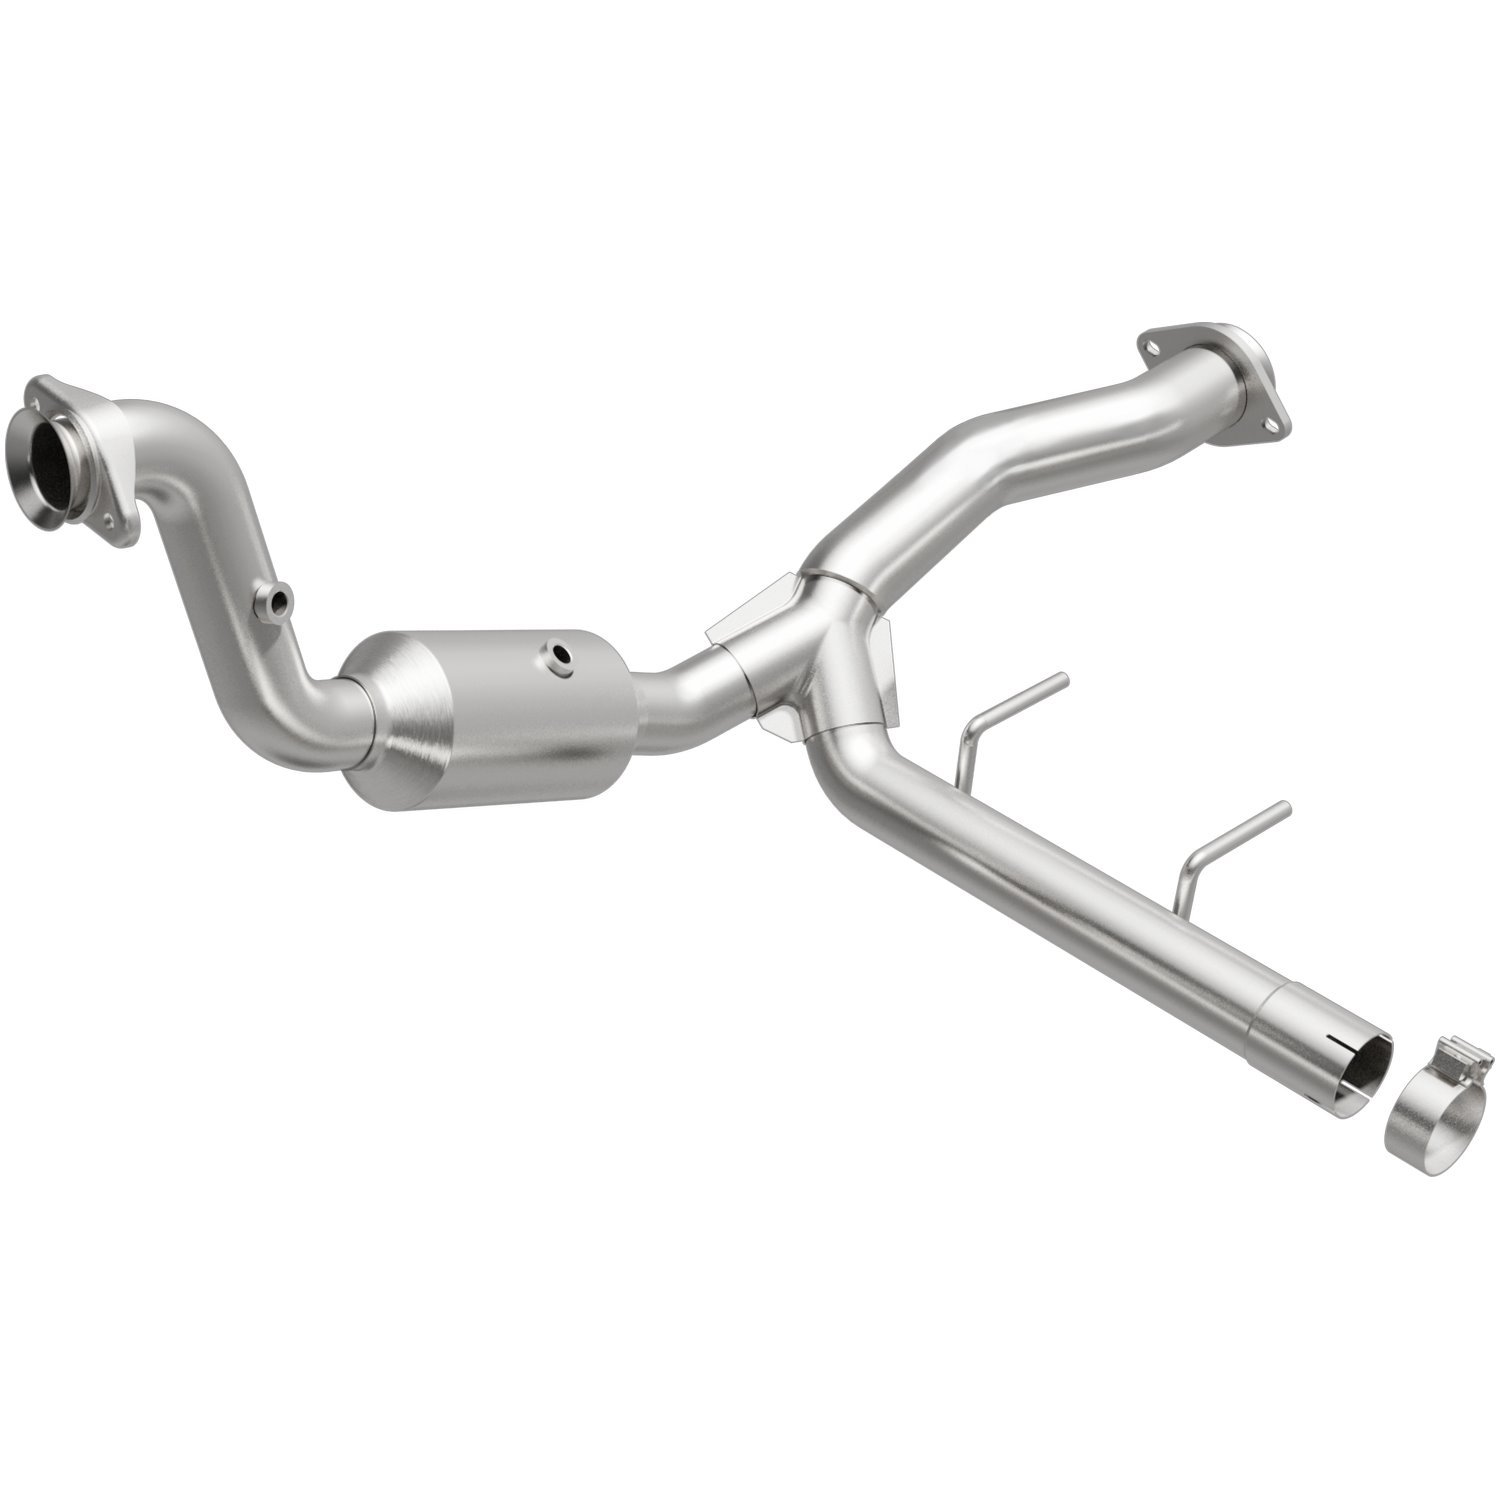 2015-2020 Ford F-150 OEM Grade Federal / EPA Compliant Direct-Fit Catalytic Converter 21-471